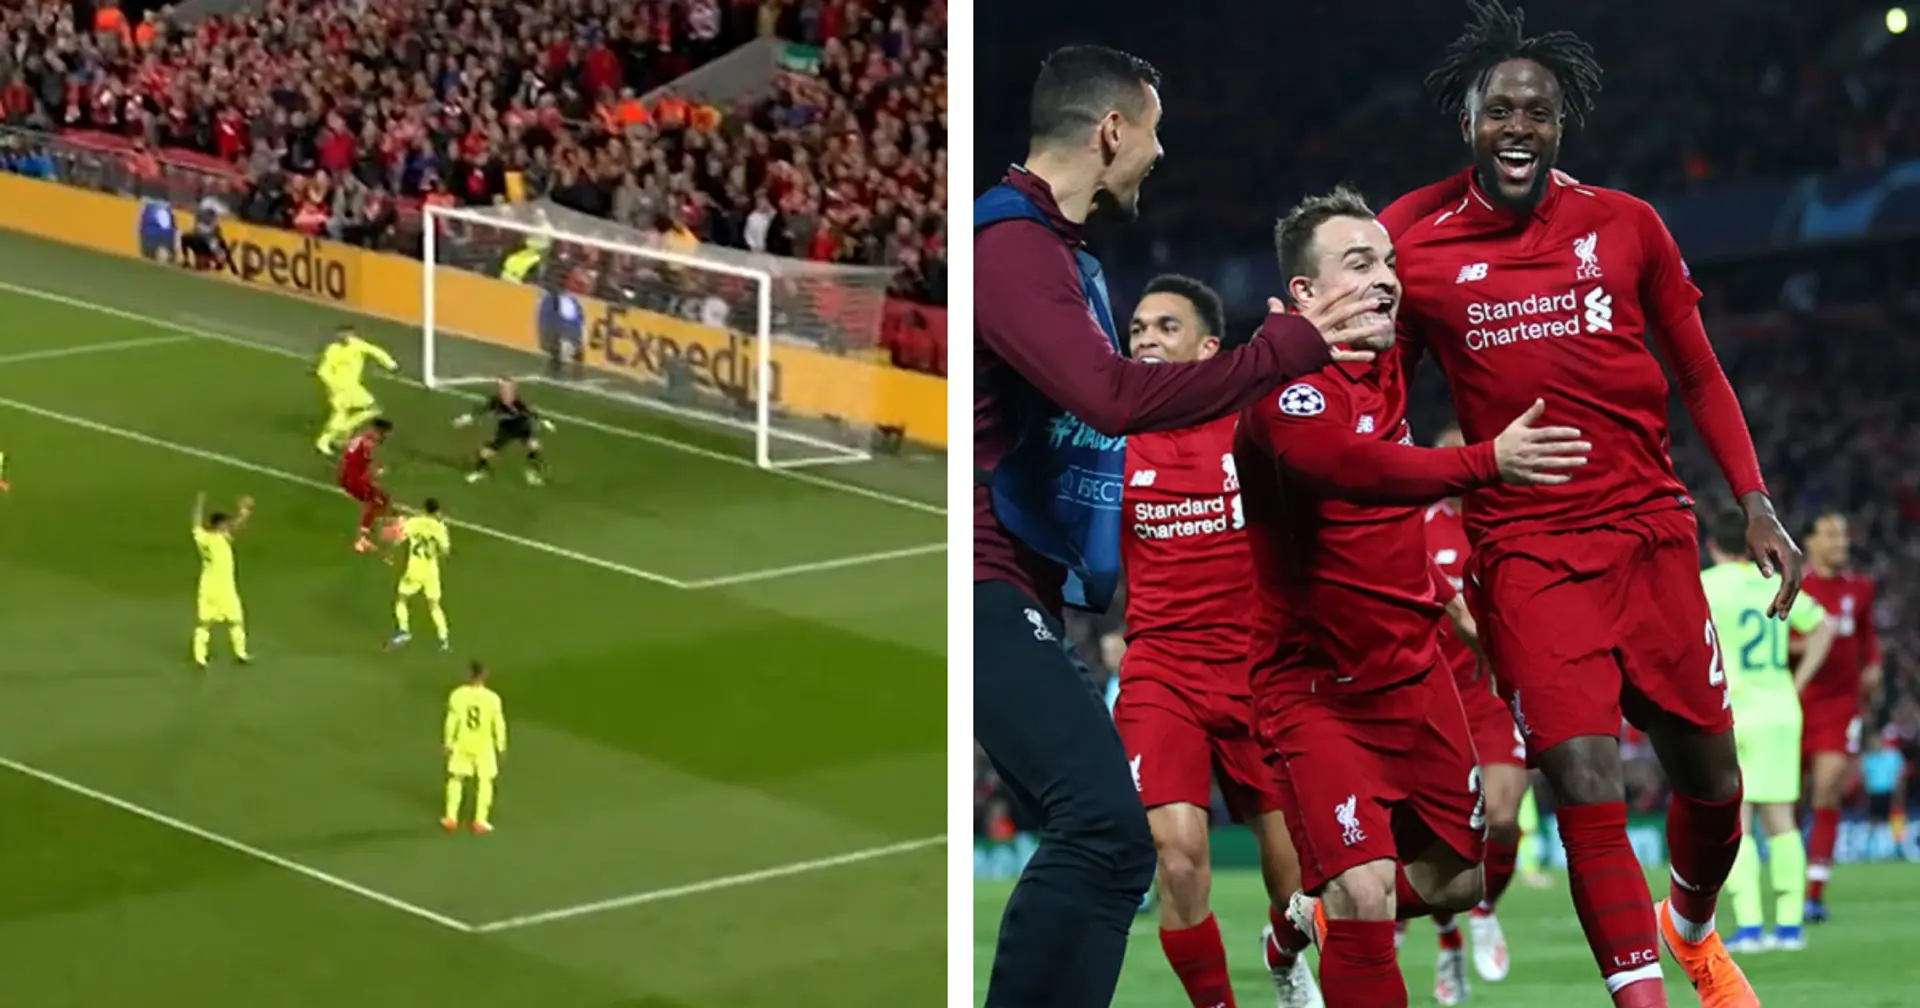 Corner taken quickly, dunking on Pickford & more: Every Origi goal for Liverpool as he leaves Liverpool (video)